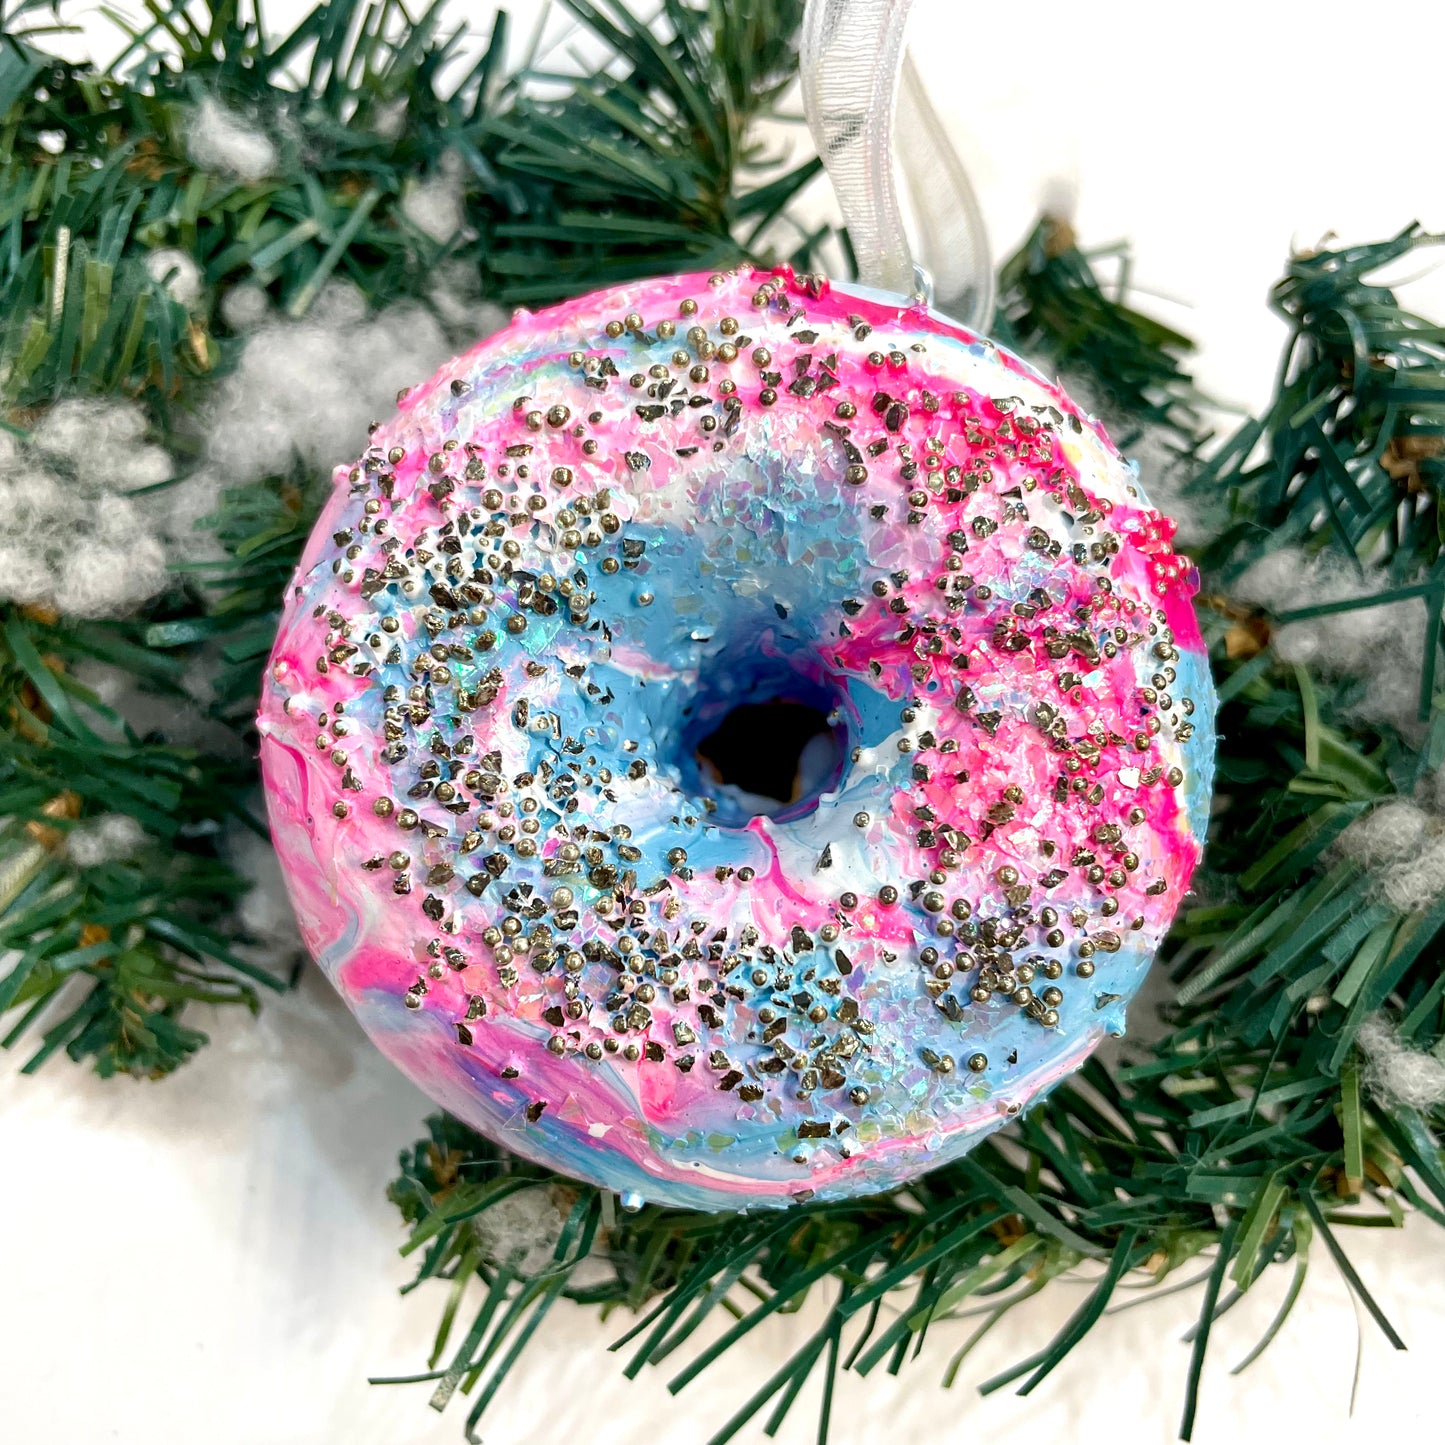 Donut Ornaments by Courtney Mixed Studios